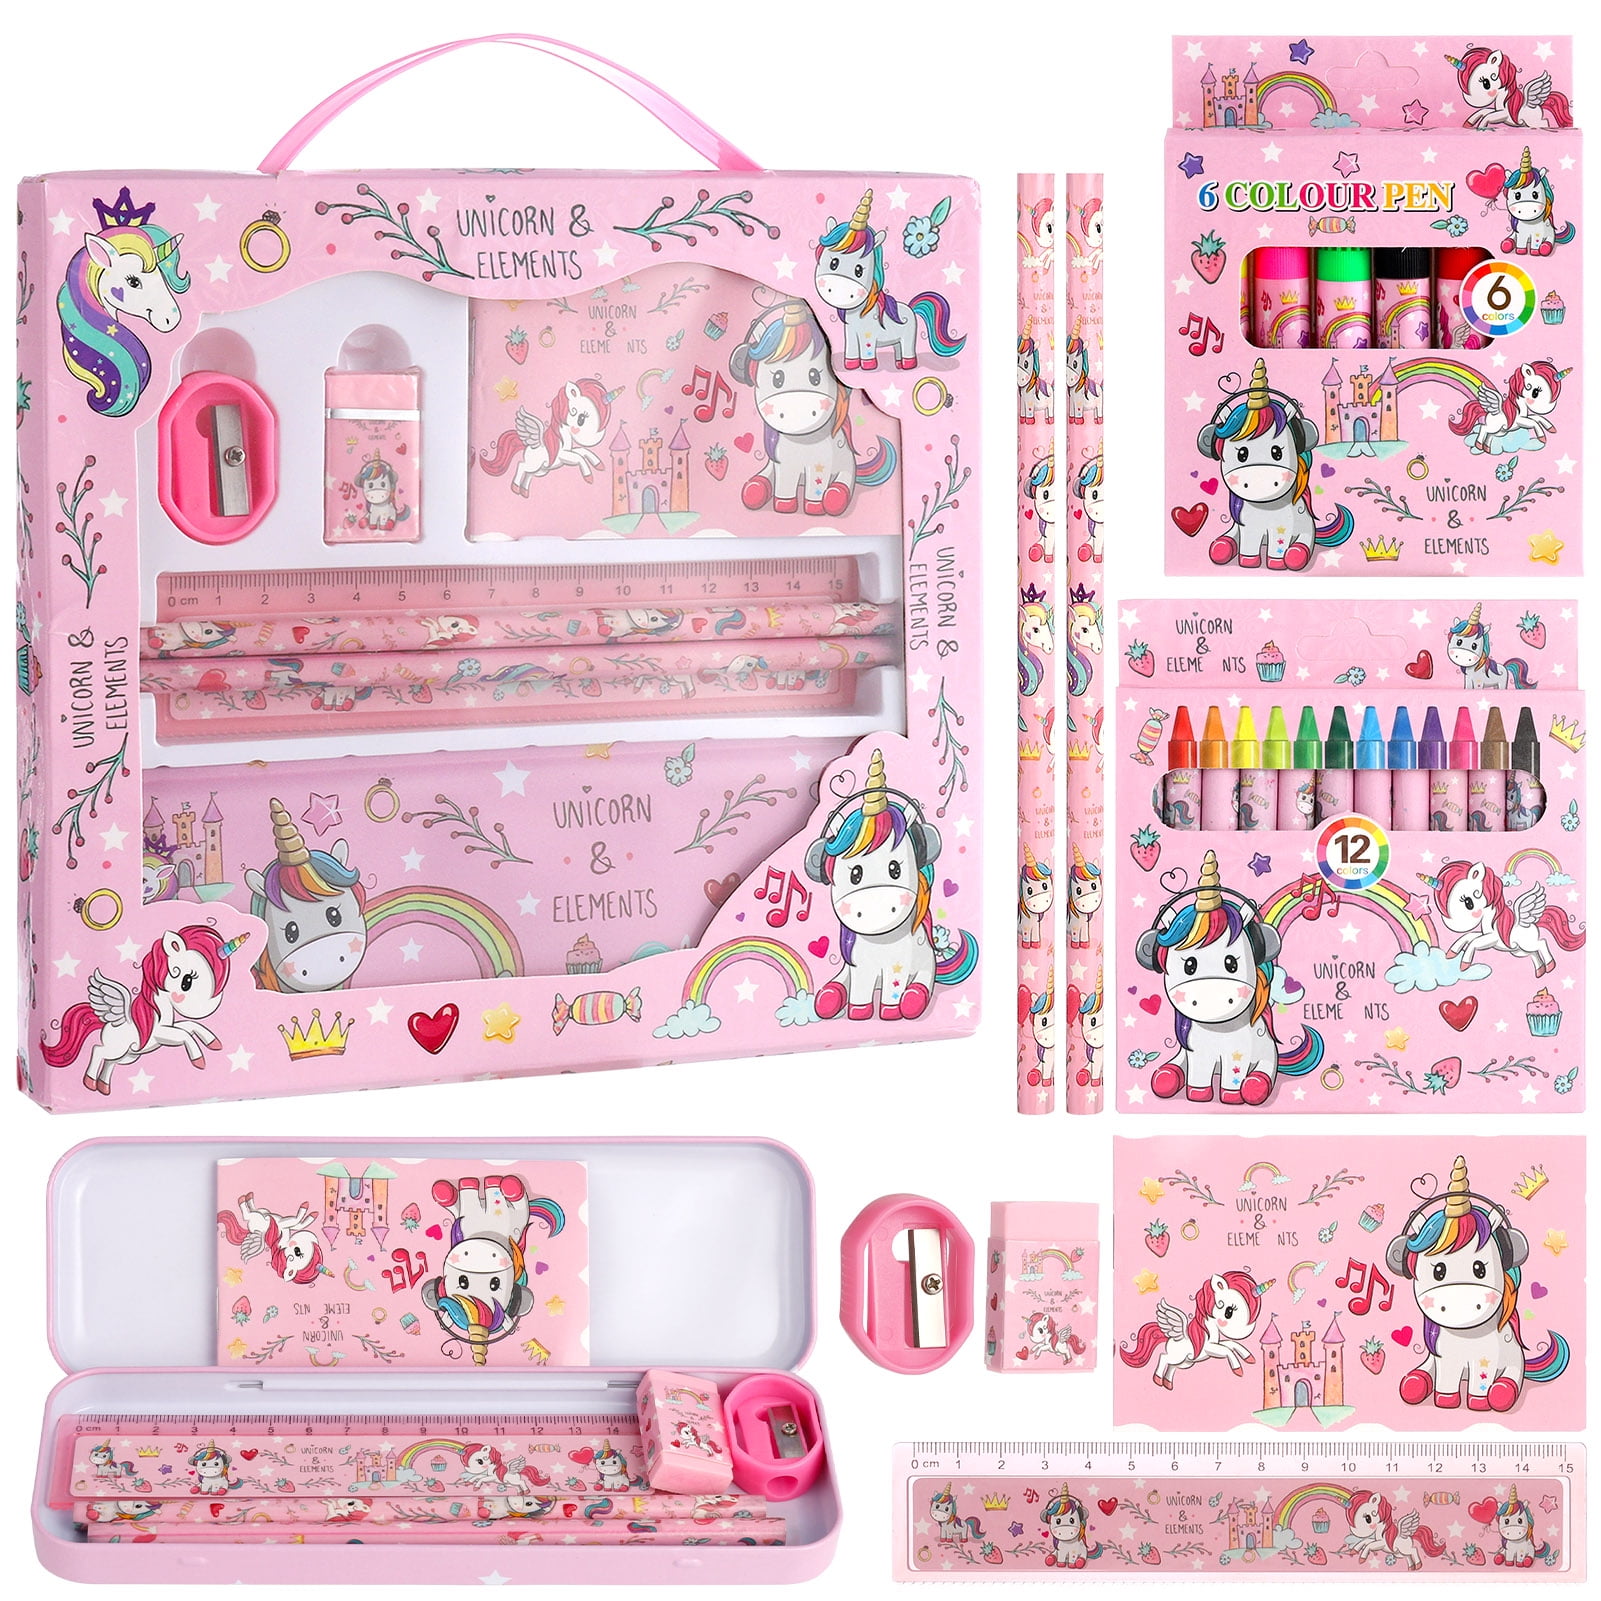 Unicorn Journal Stationary Set,Unicorns Gifts For Girls Ages 6 7 8 9 10 11  12 Year Old,49 Pieces Stationary Letter Writing Crafting Kit with Storage